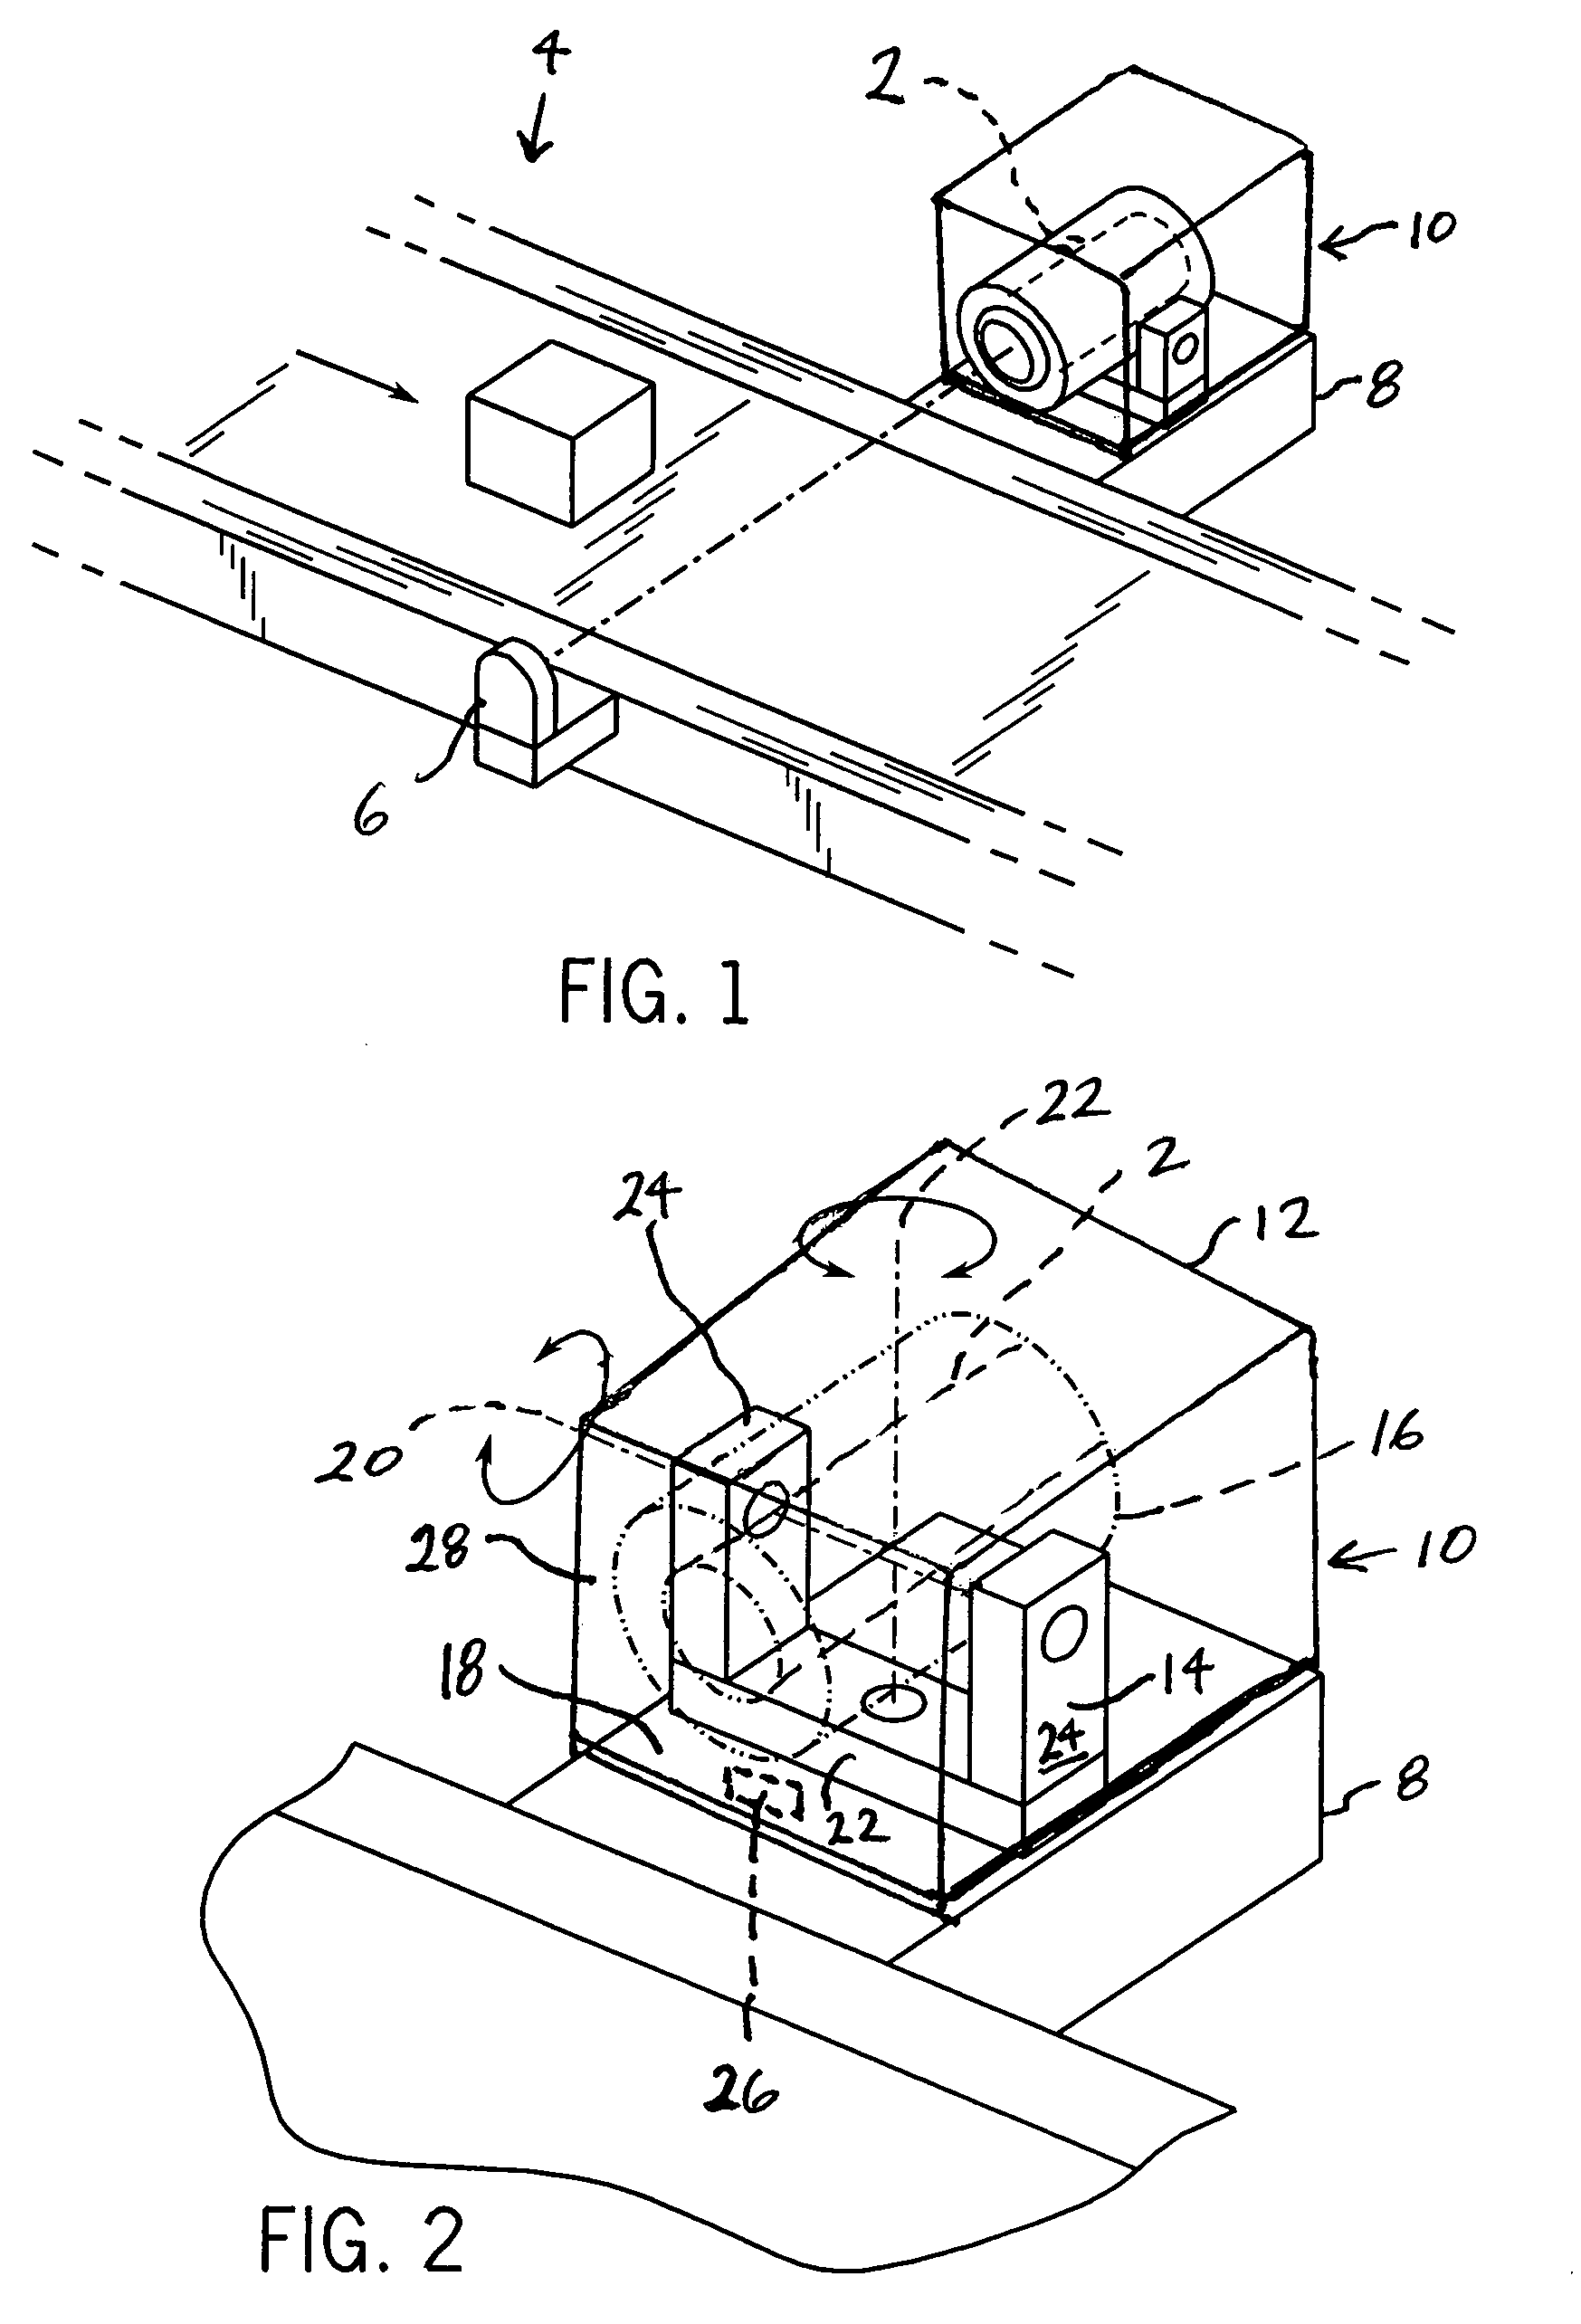 Sensor mounting structure allowing for adjustment of sensor position